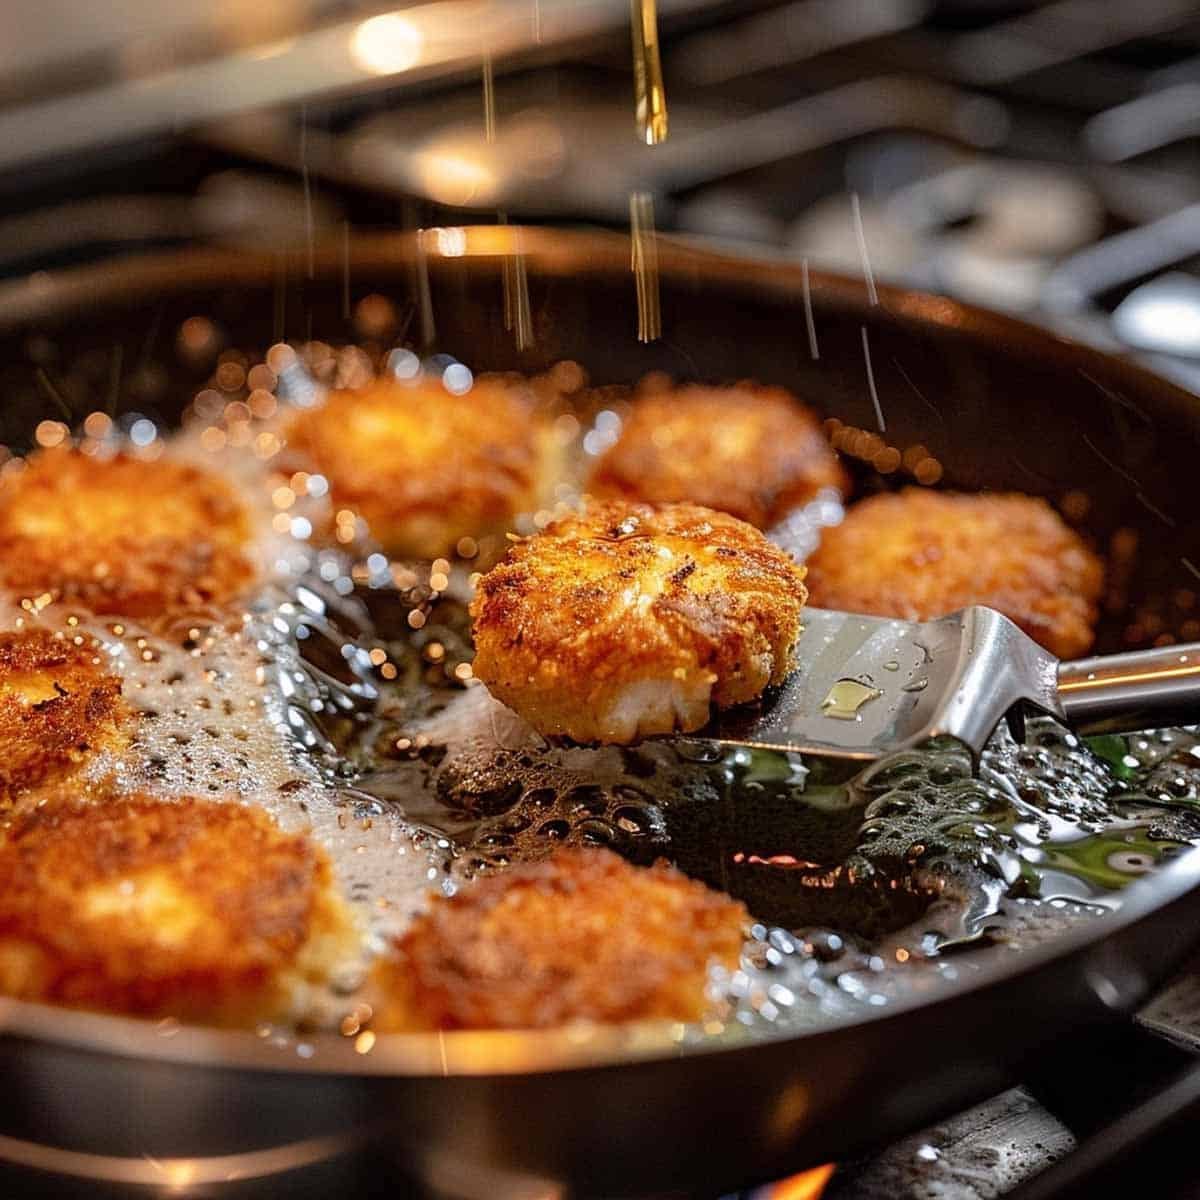 Golden brown uncooked Thai Shrimp Cakes being cooked in a pan.